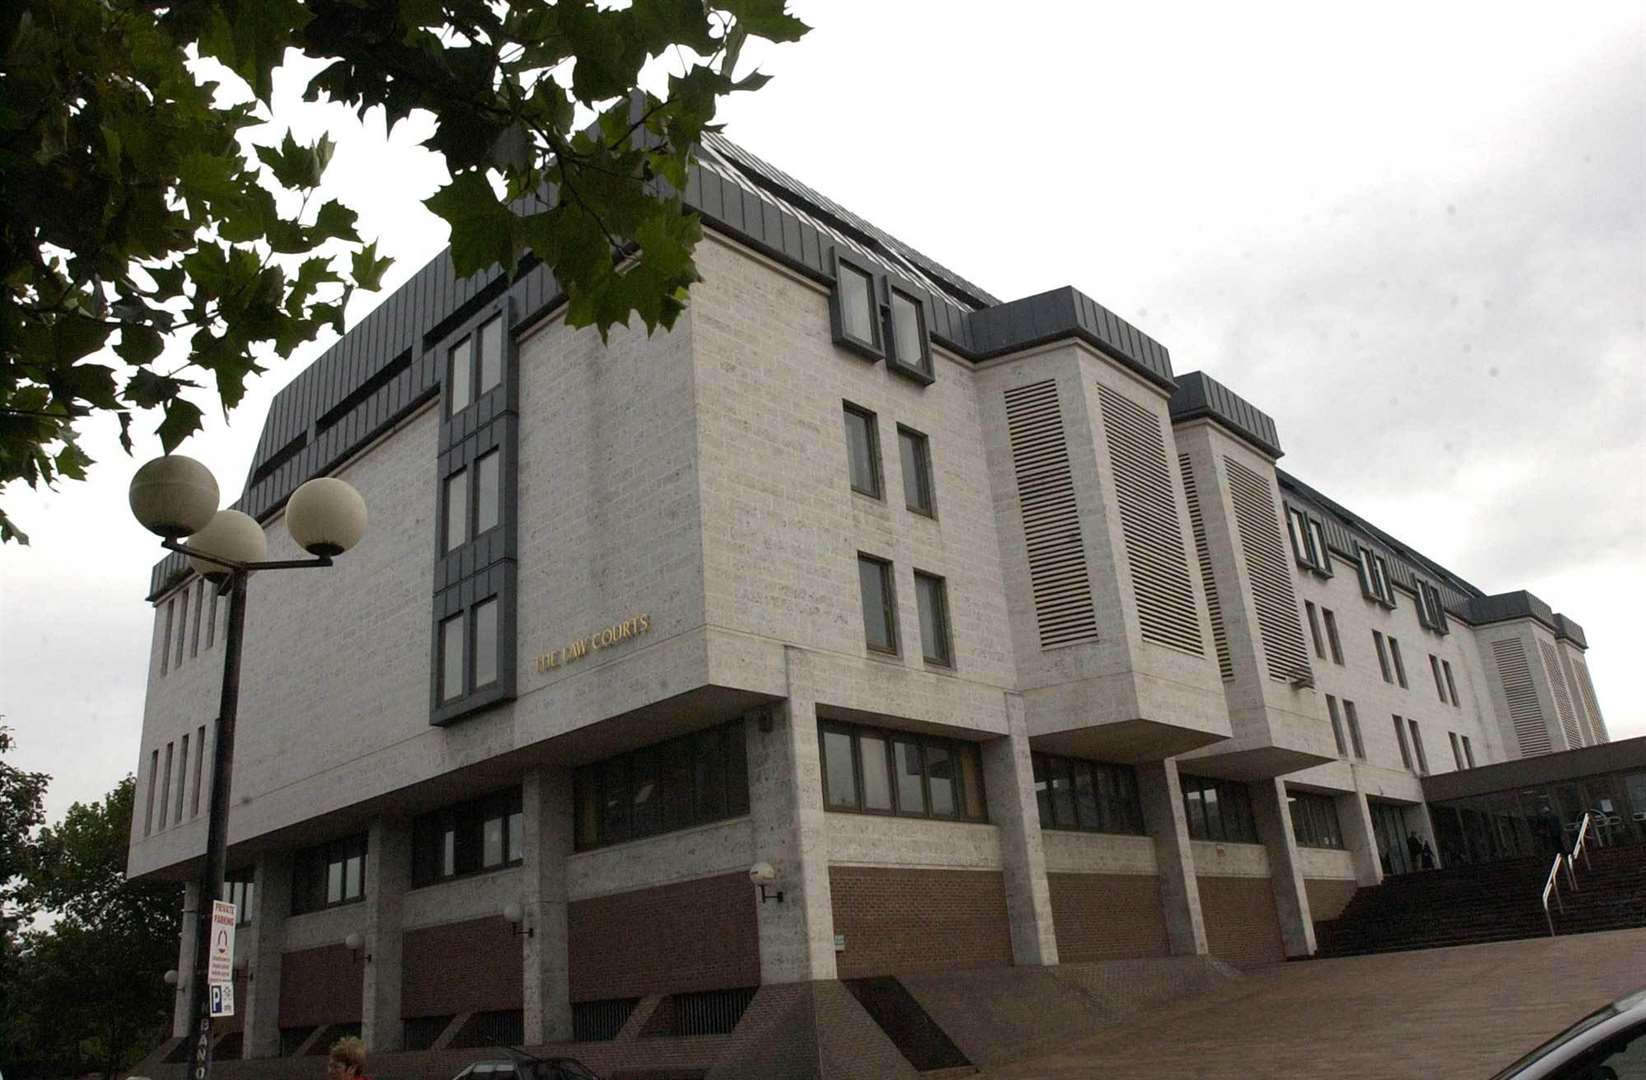 The hearing was at Maidstone Crown Court